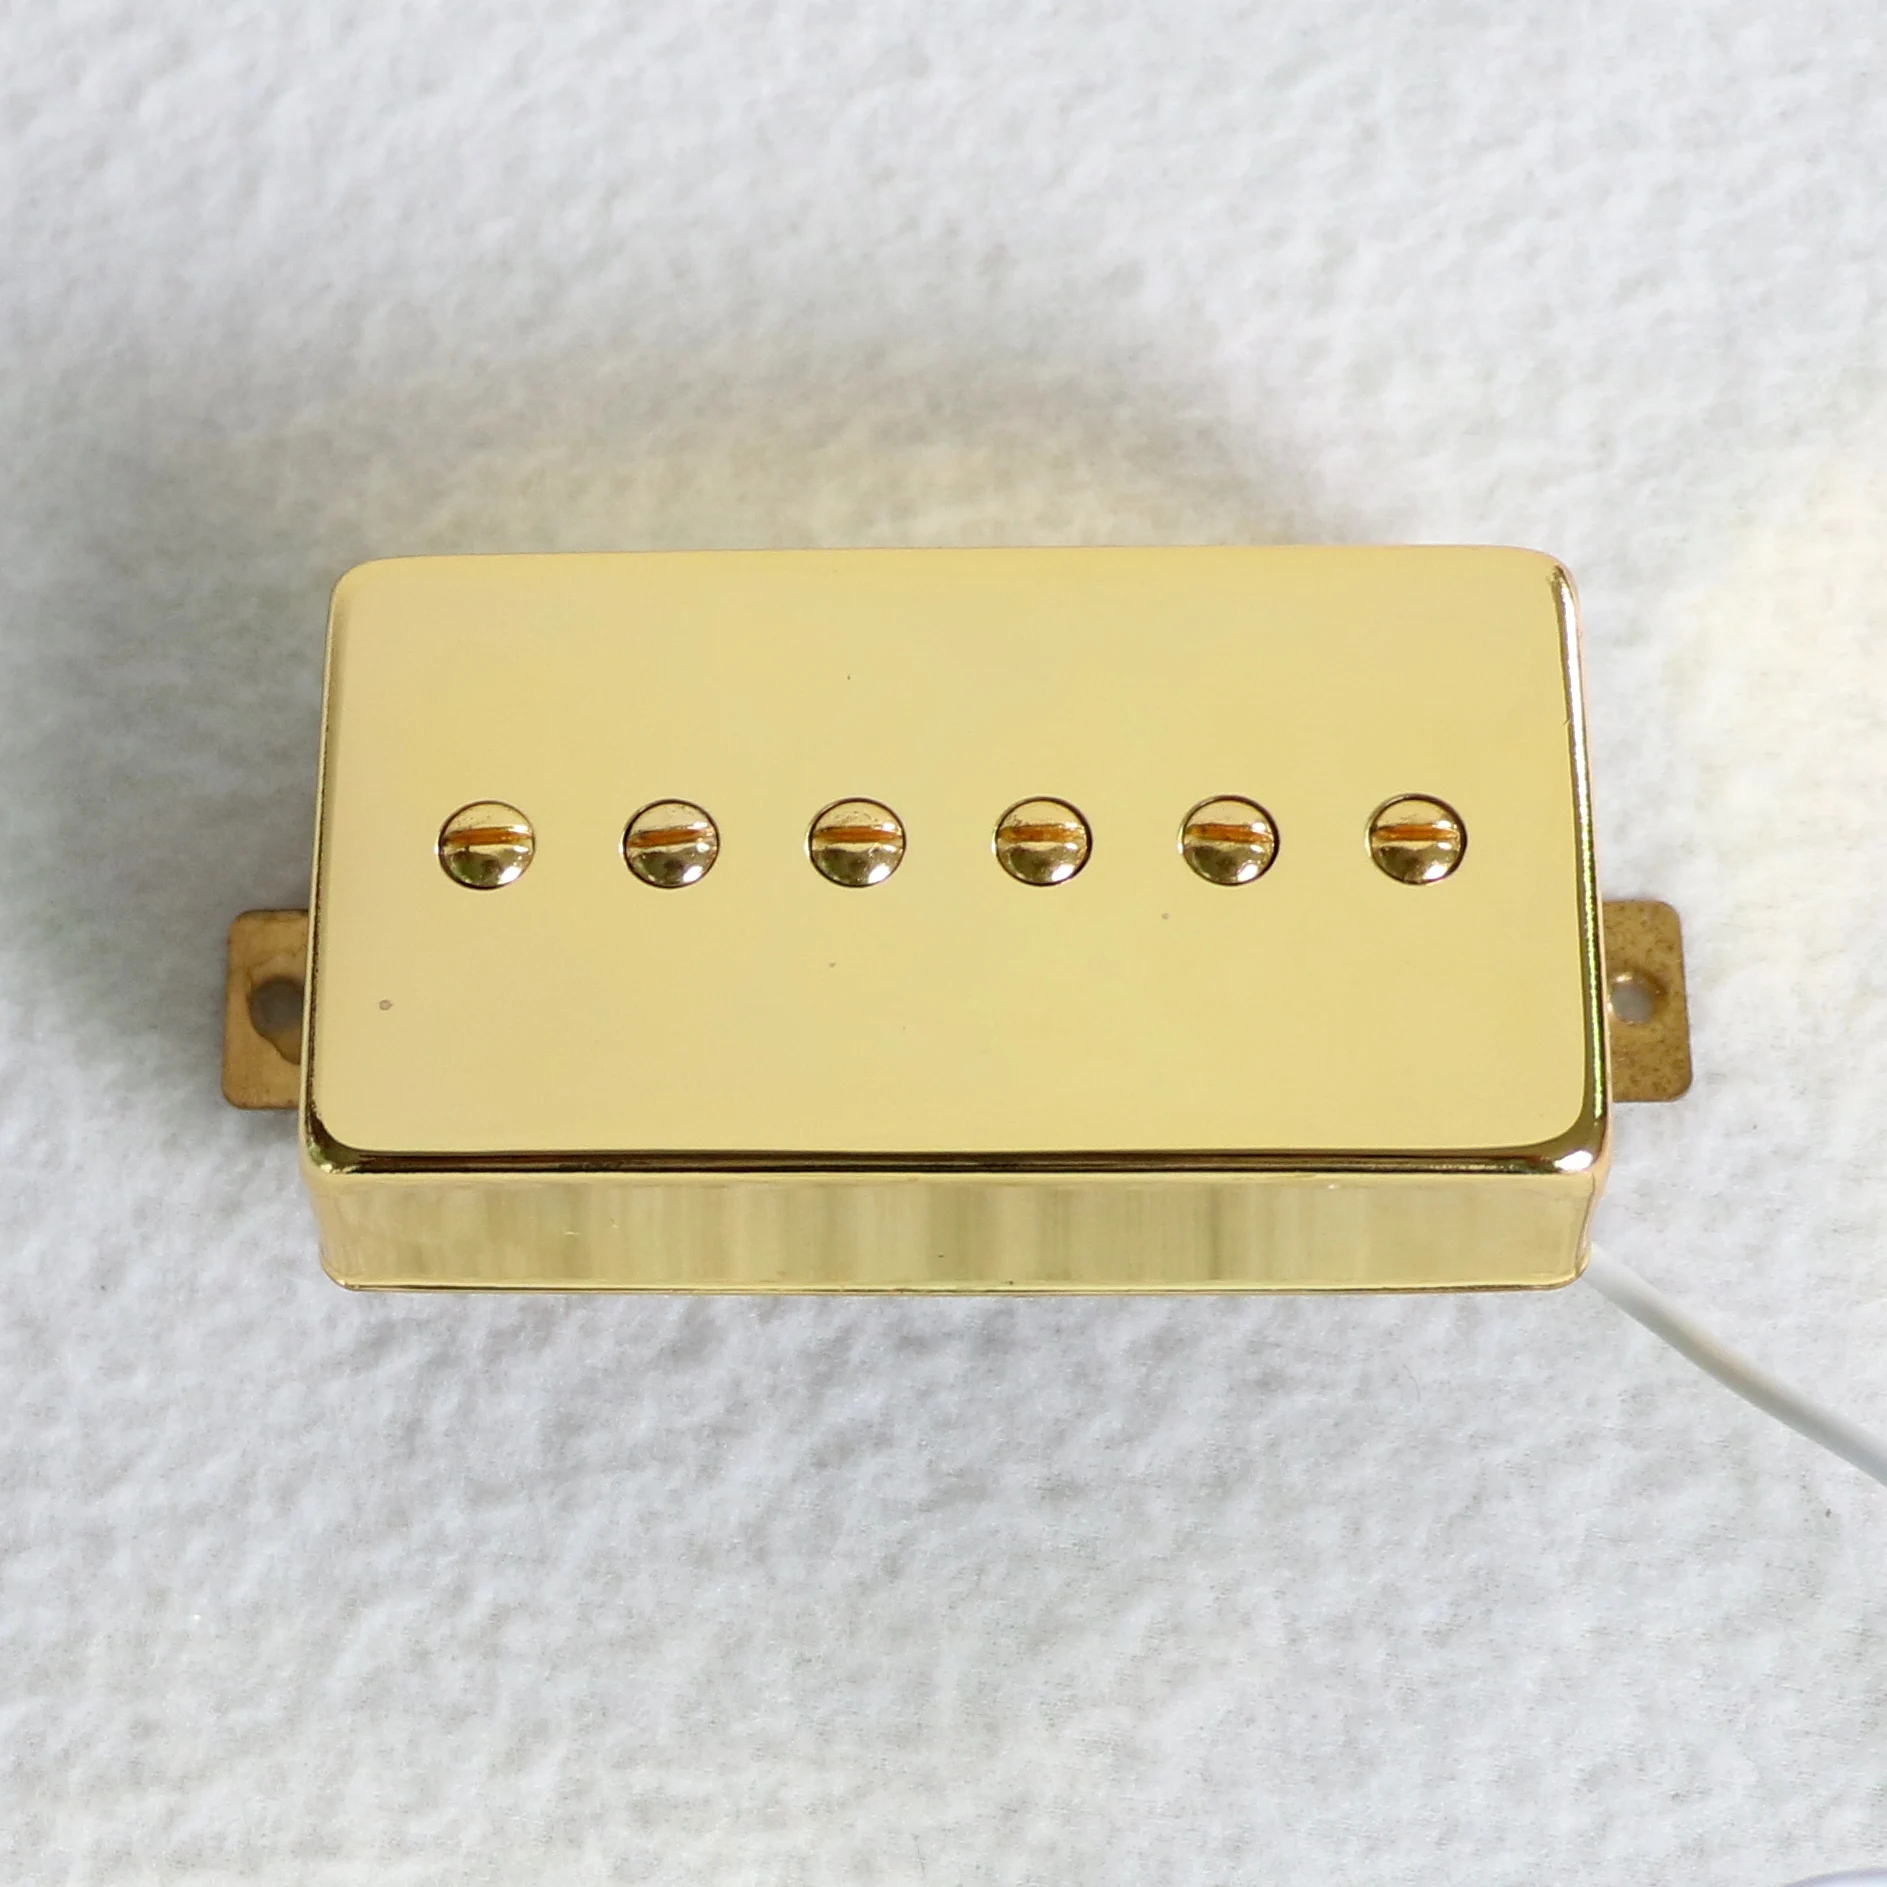 

Donlis P90 style humbucker size Alnico 2 Gold cover LP Guitar Pickup with single coil electric guitar pickups guitar parts